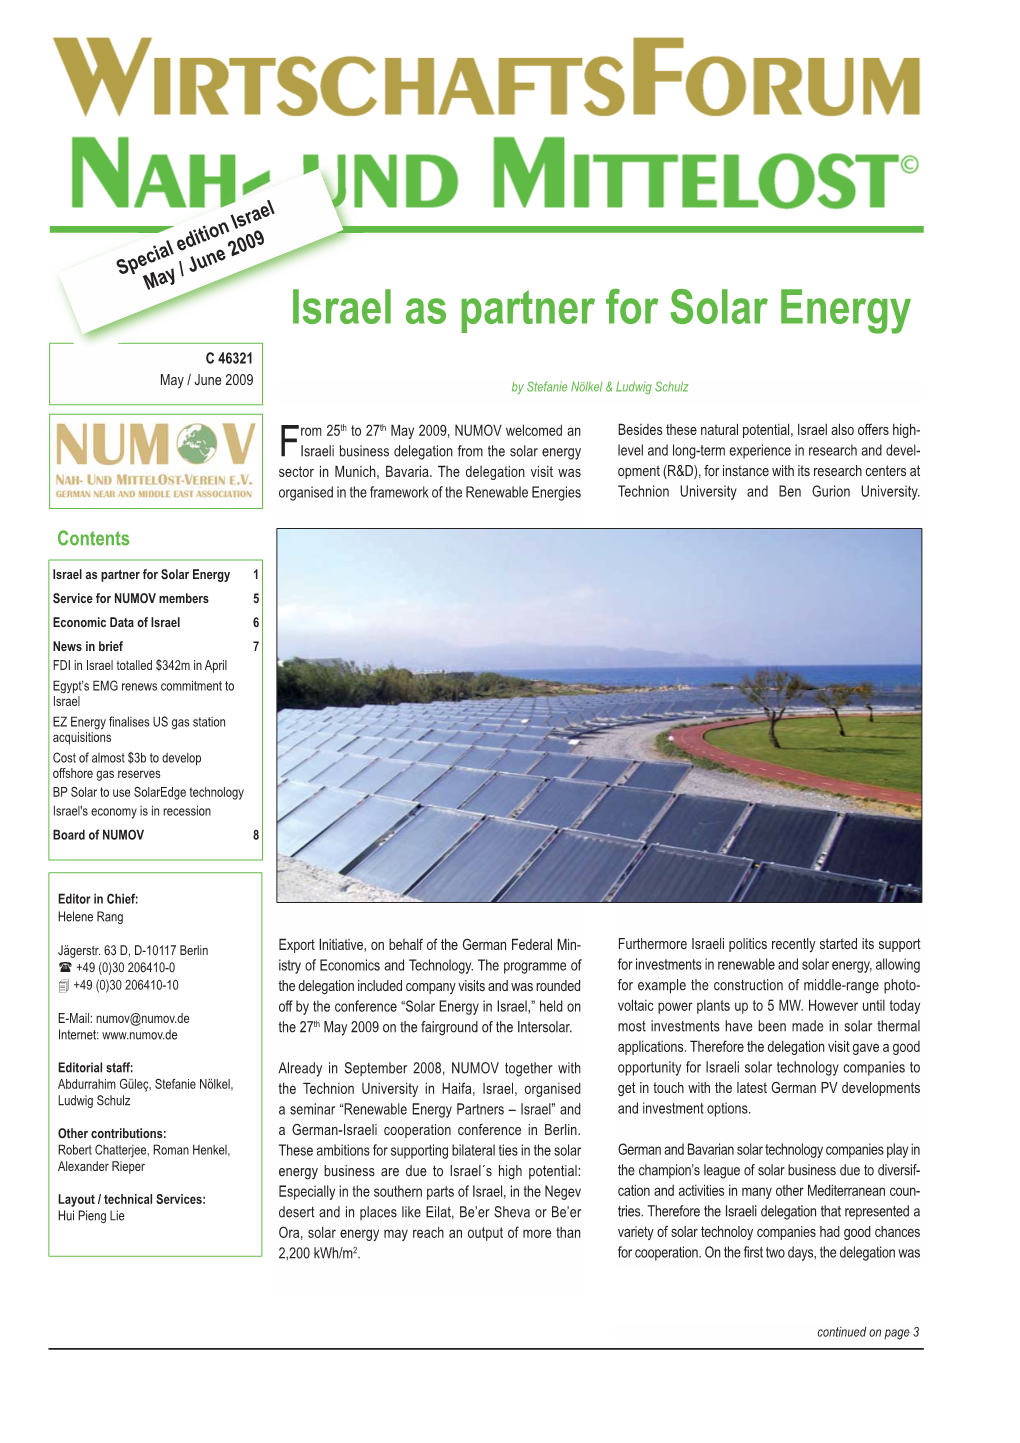 Solar Energy in Israel,” Held on Voltaic Power Plants up to 5 MW